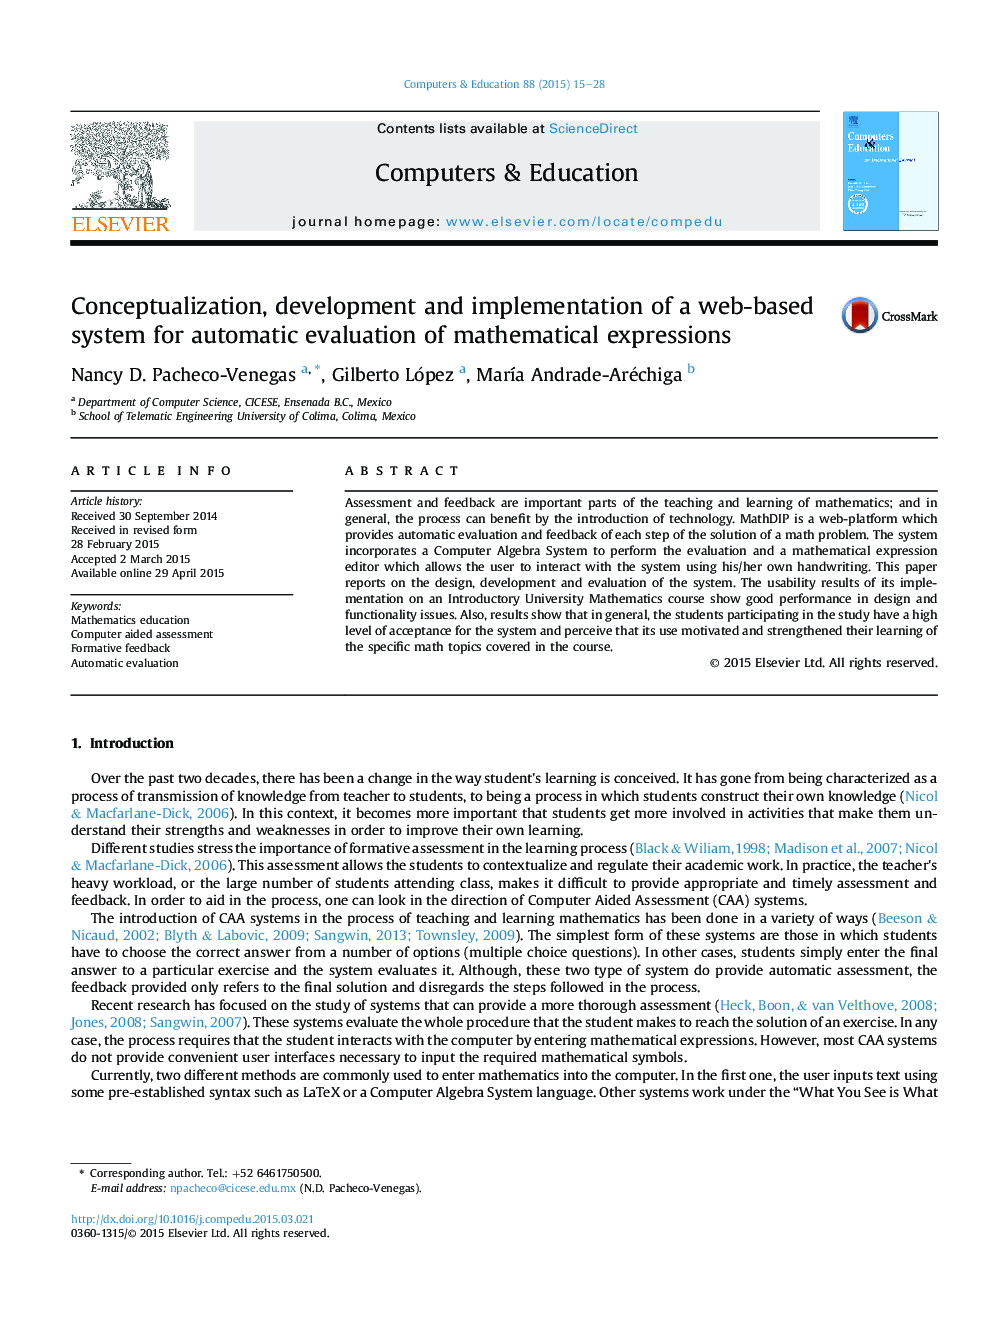 Conceptualization, development and implementation of a web-based system for automatic evaluation of mathematical expressions